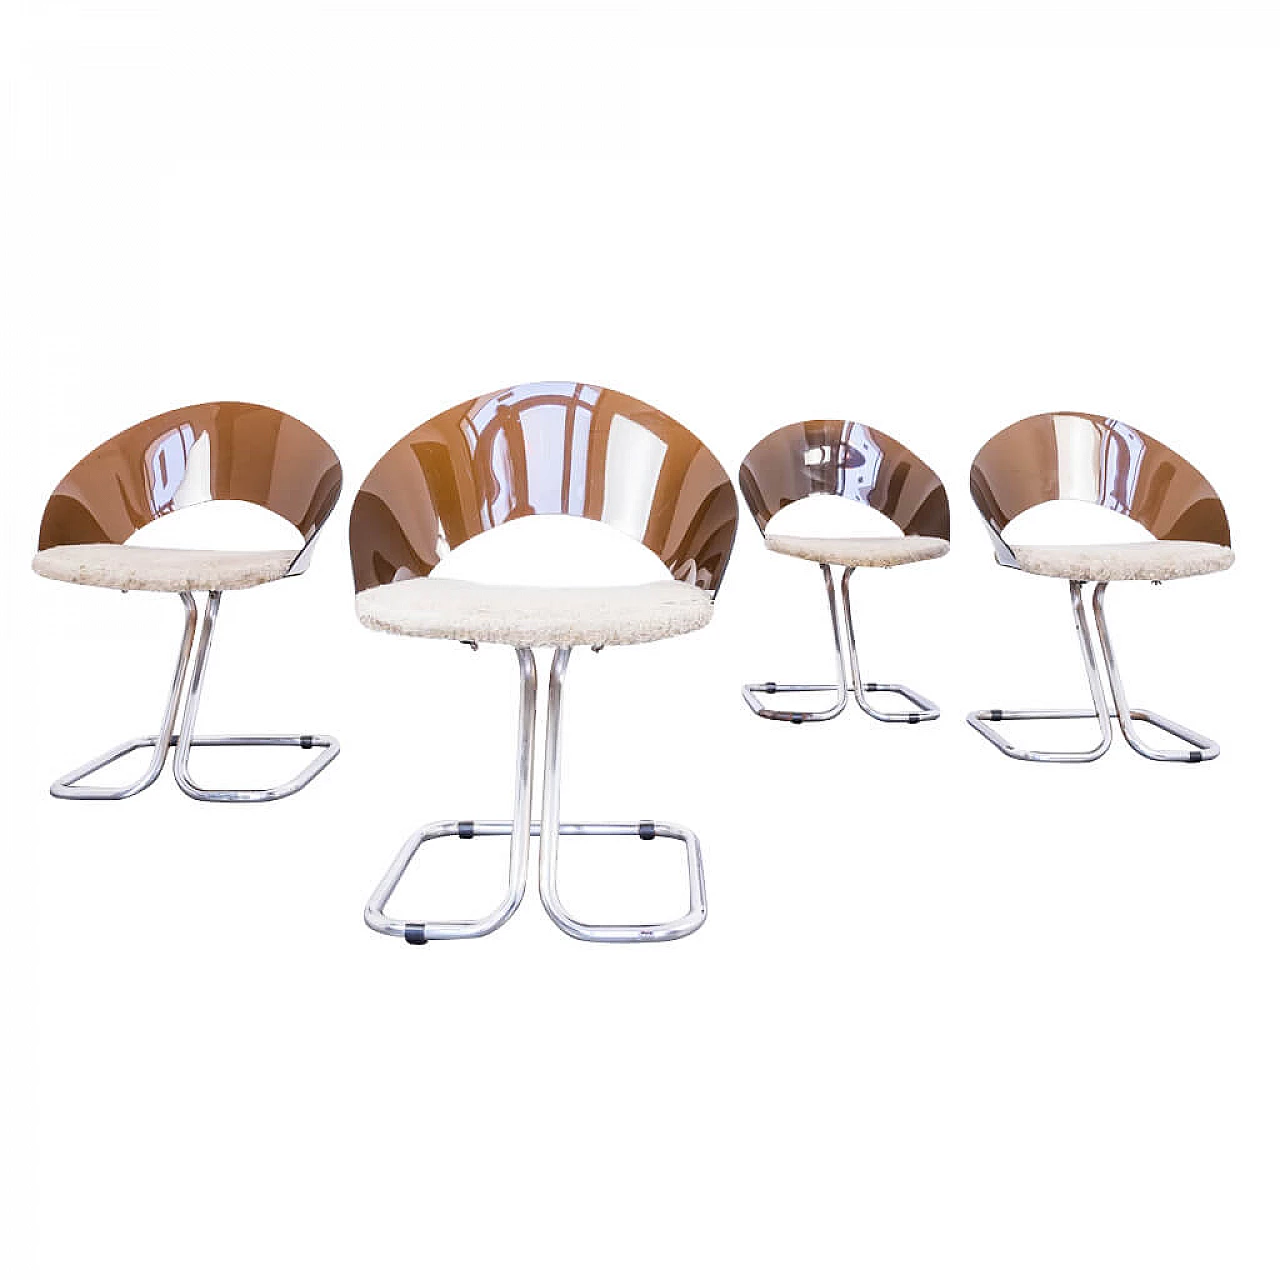 4 Steel and plexiglass chairs Faleschini style, 80s 1222699